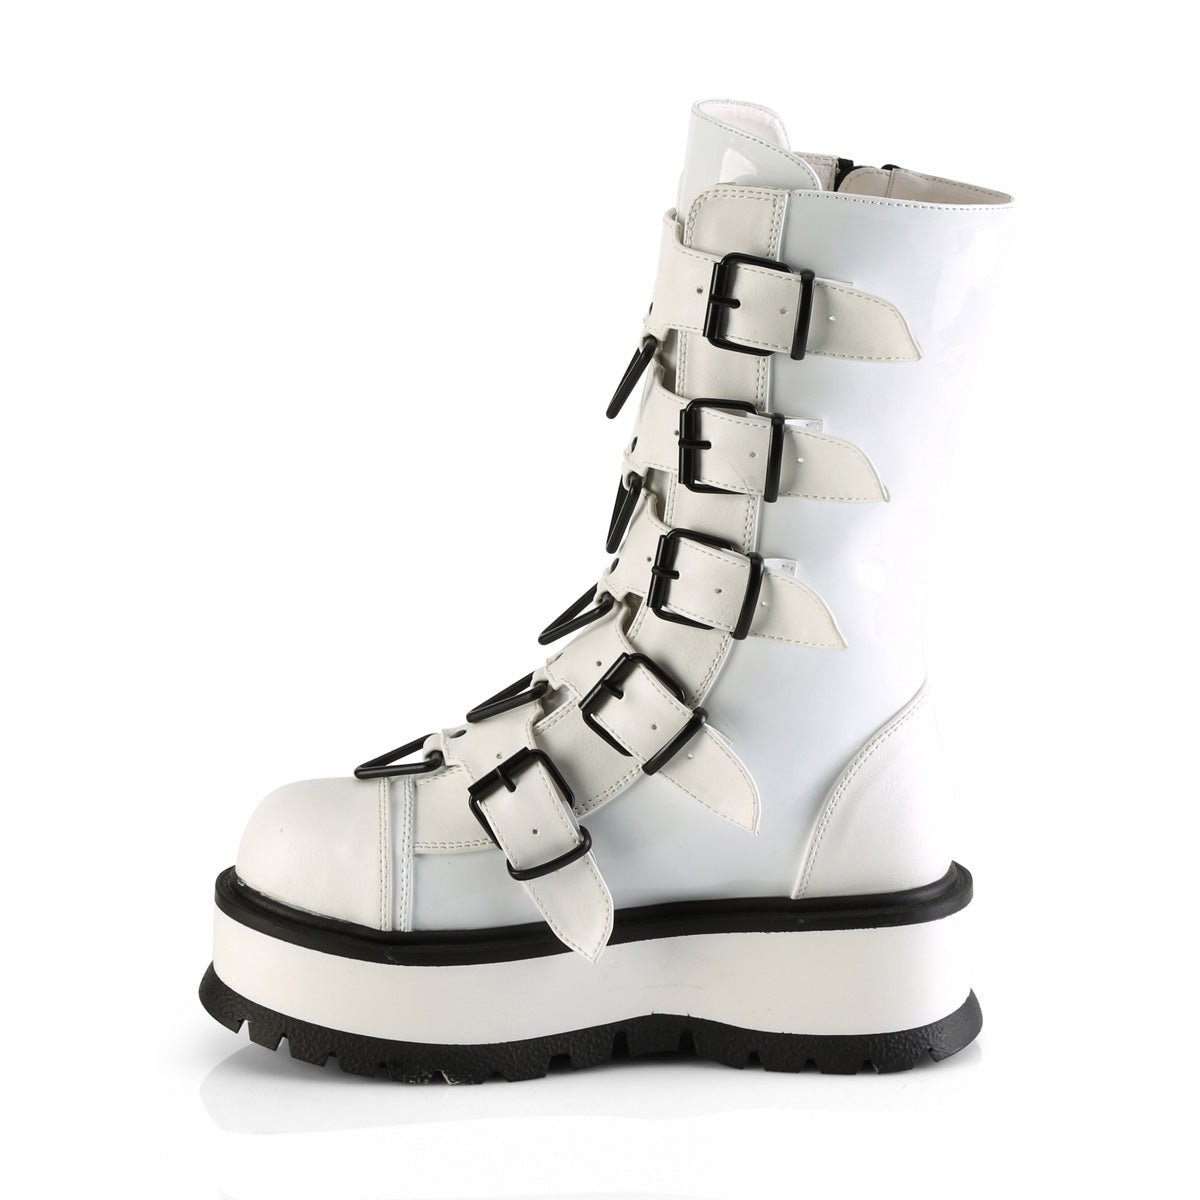 Too Fast | Demonia Slacker 160 | White Patent Leather Women's Mid Calf Boots